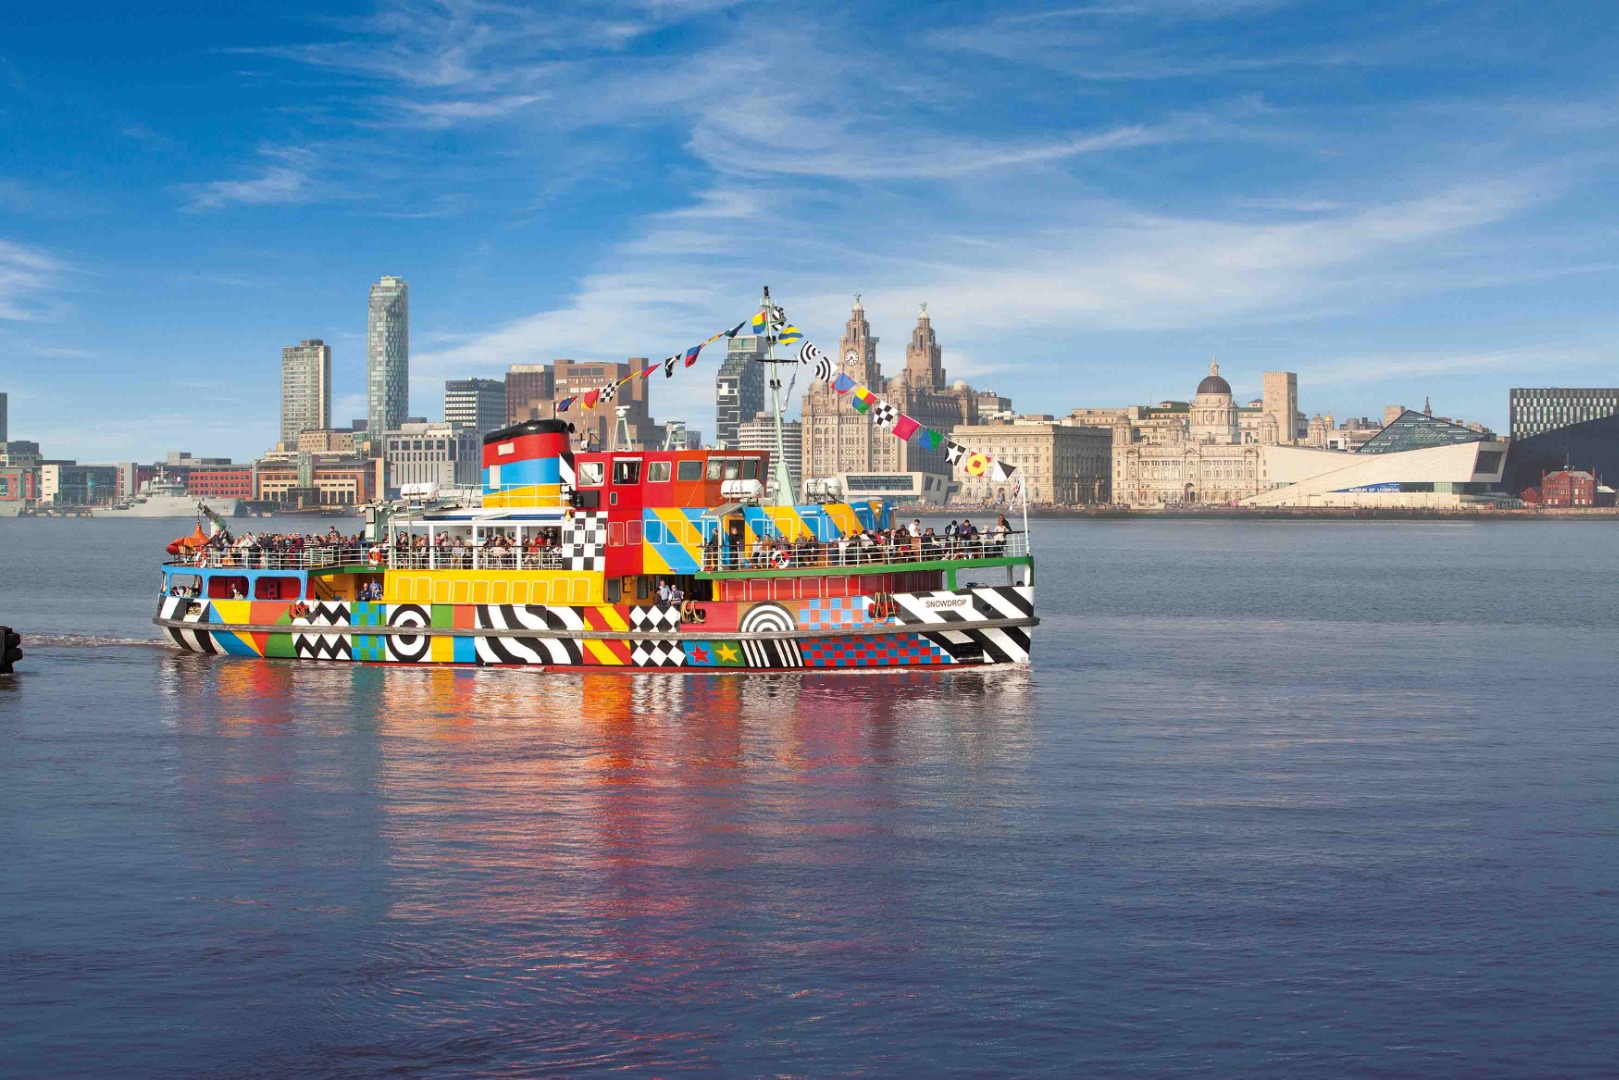 liverpool boat trips